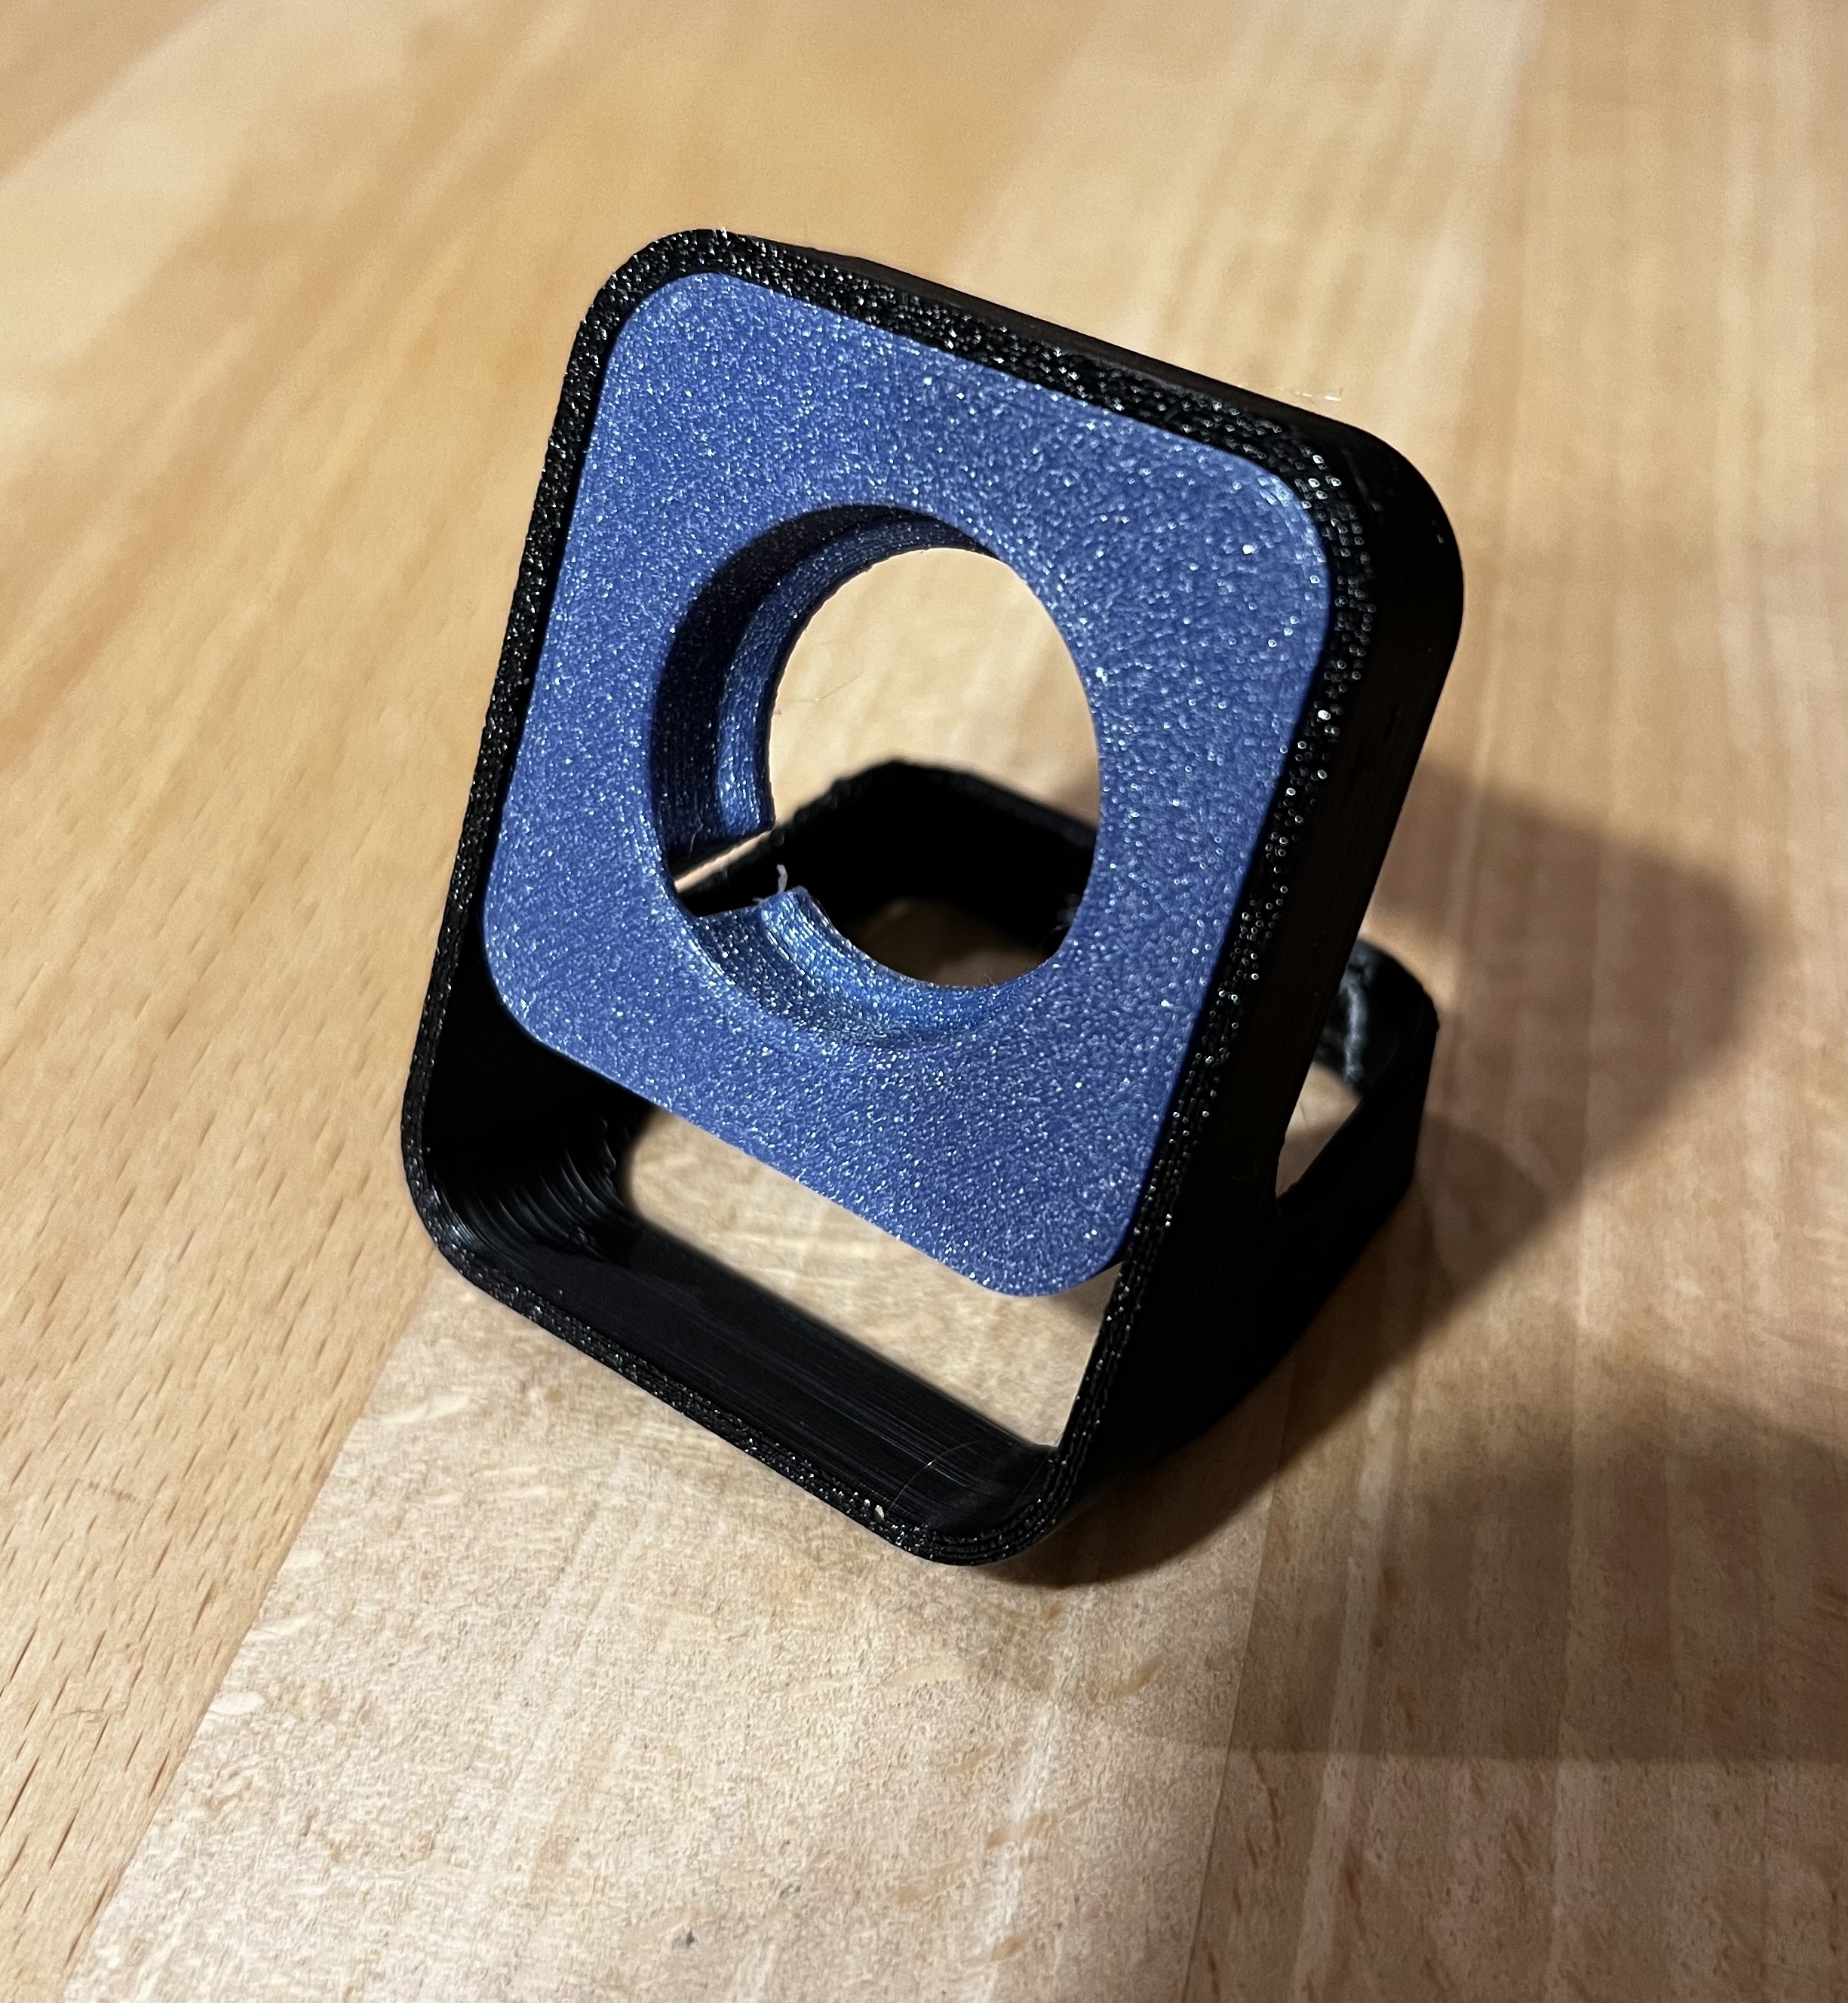 Apple Watch Charger Stand